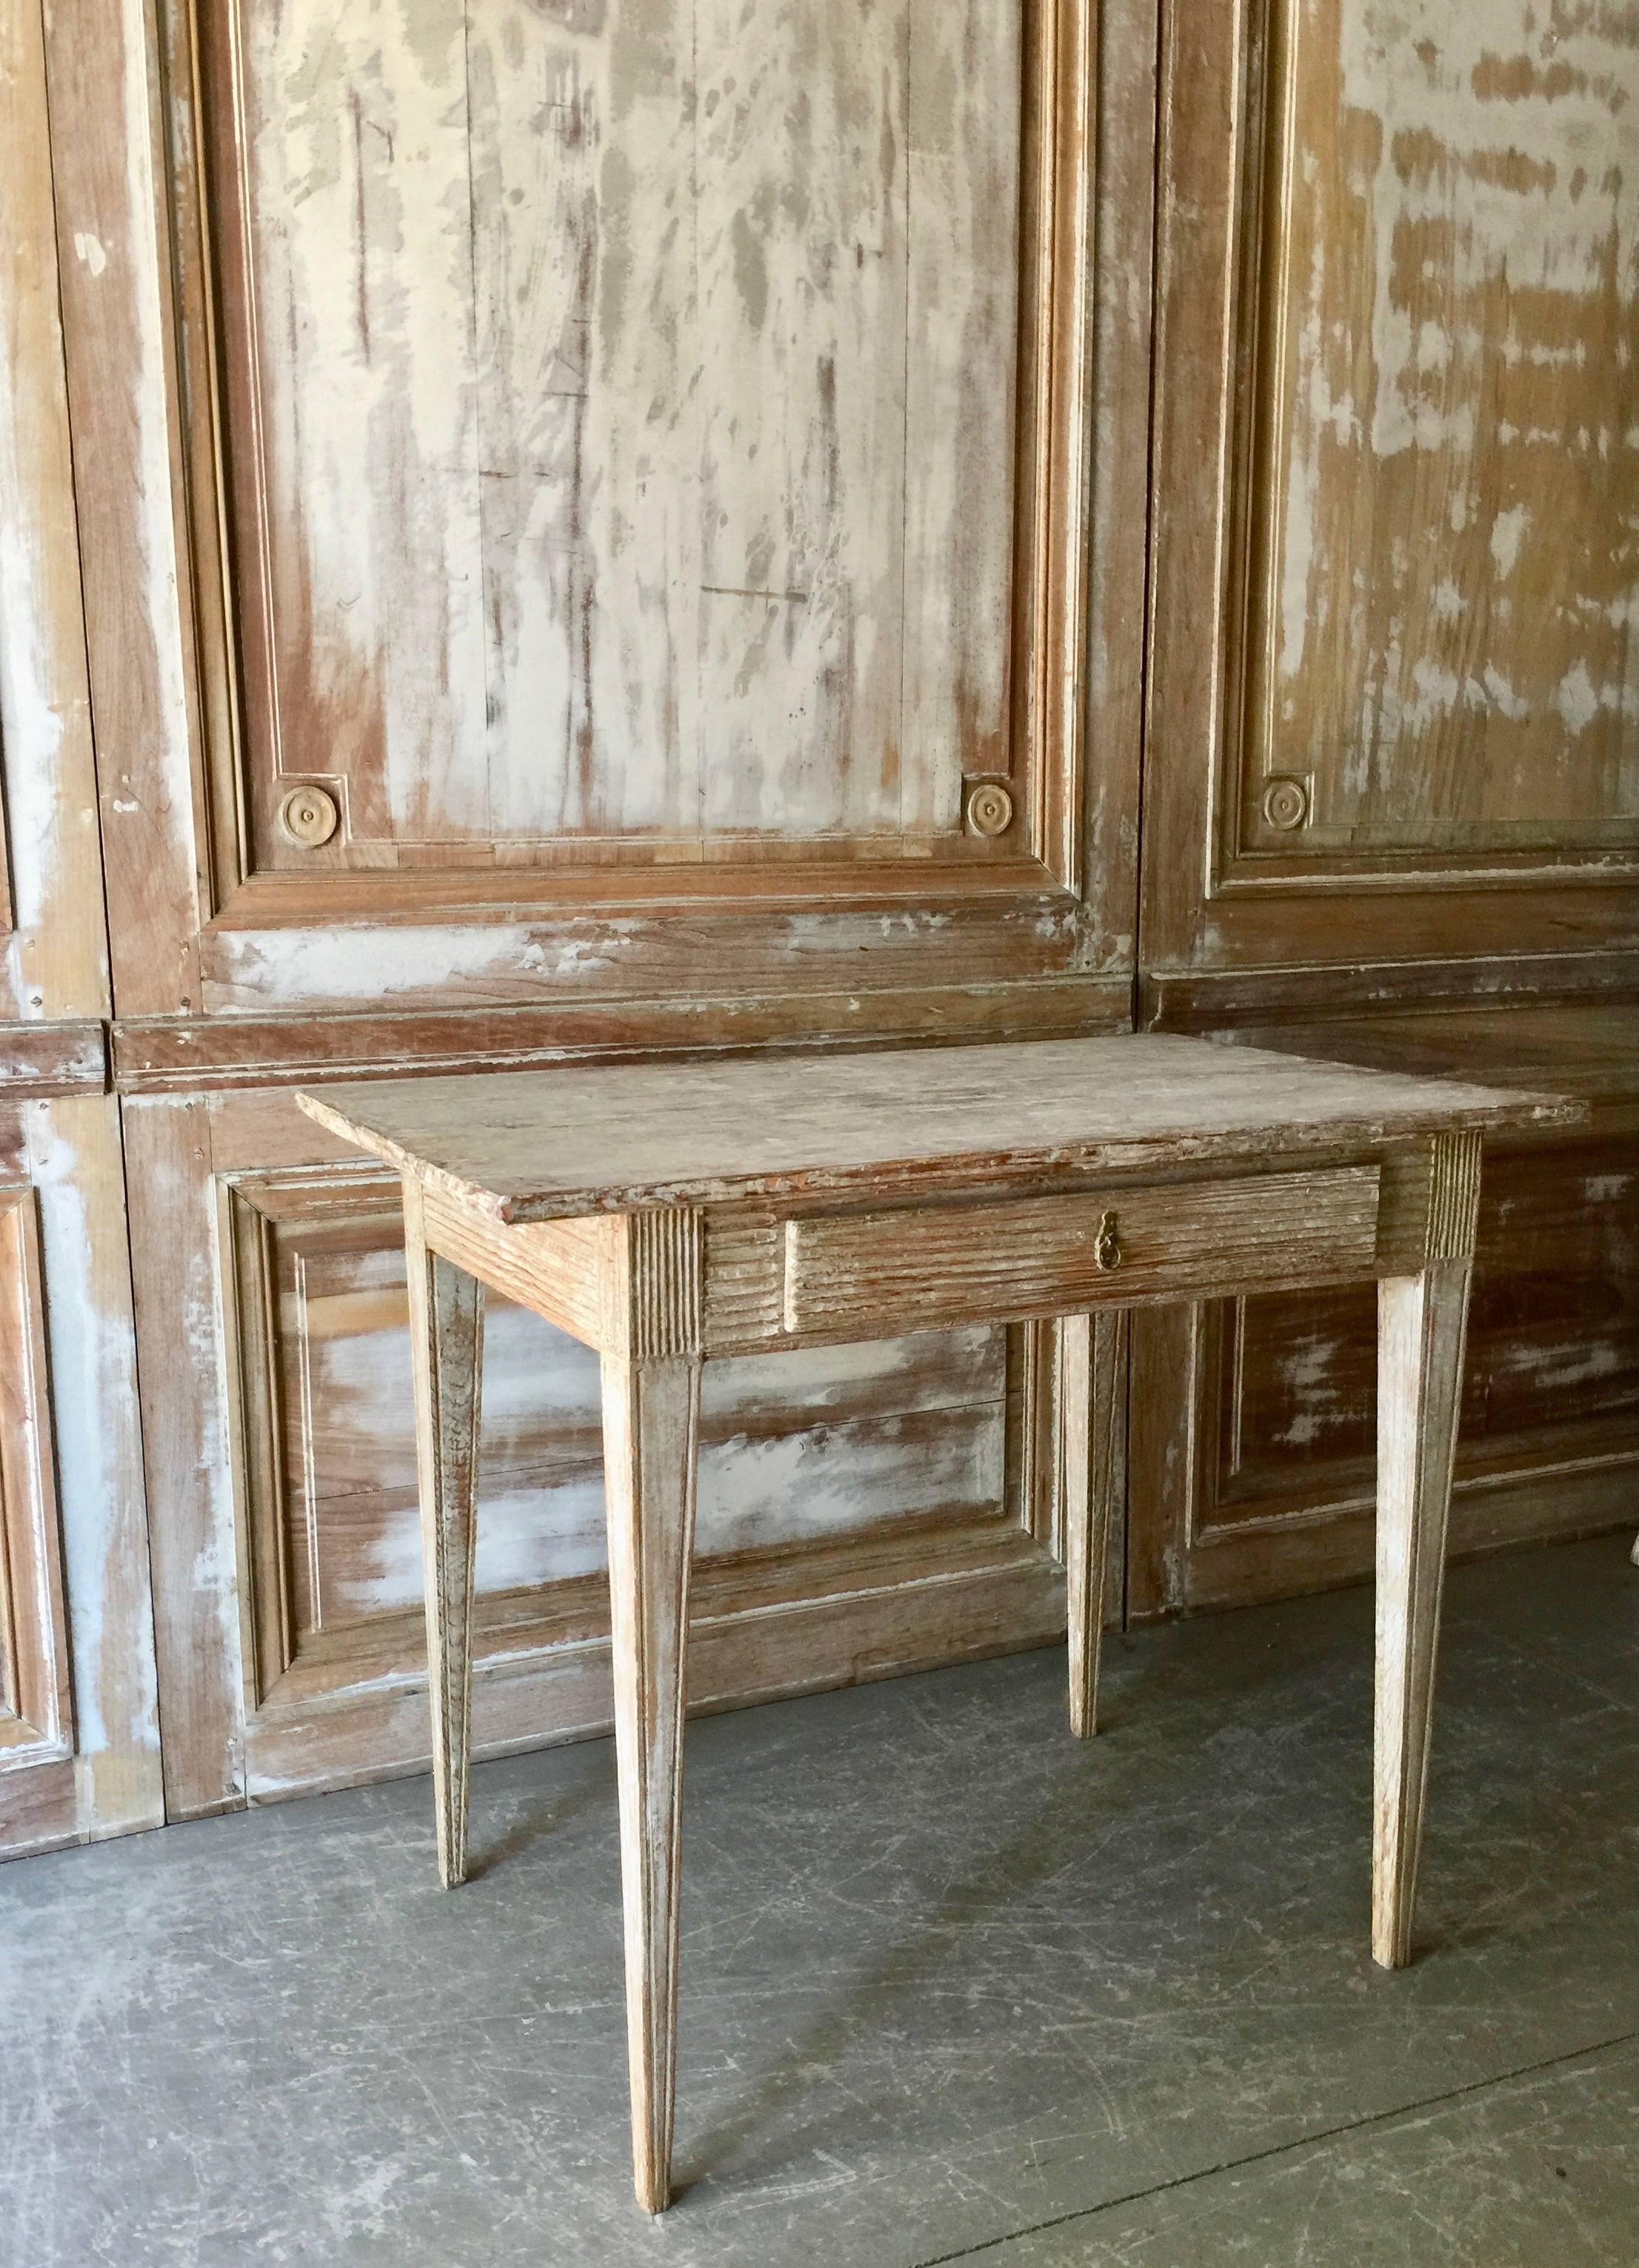 Adorable Swedish period Gustavian table with one drawer and horizontal fluting on front frieze and corner blocks. A lovely piece.
Stockholm, Sweden, circa 1800-1810.
Surprising pieces and objects, authentic, decorative and rare items. Discover